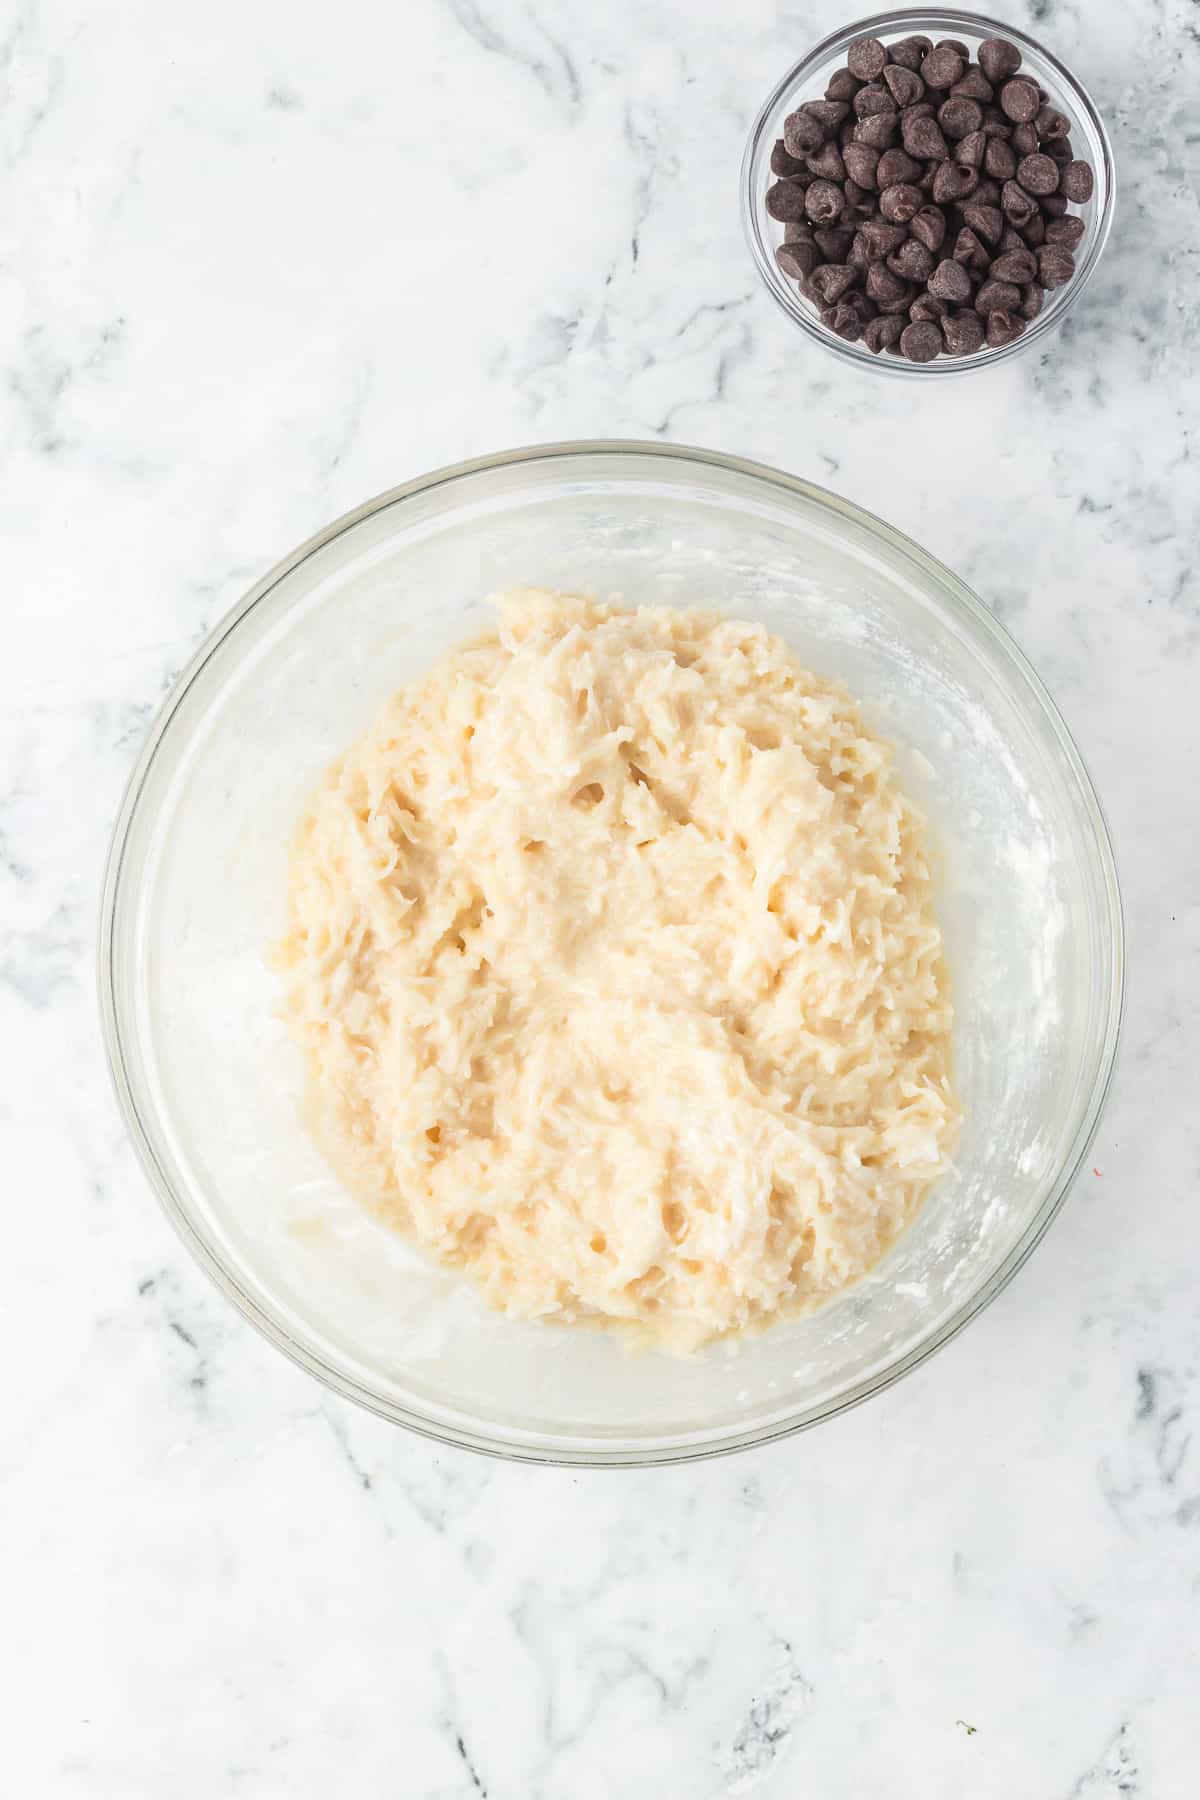 The coconut cookie base.